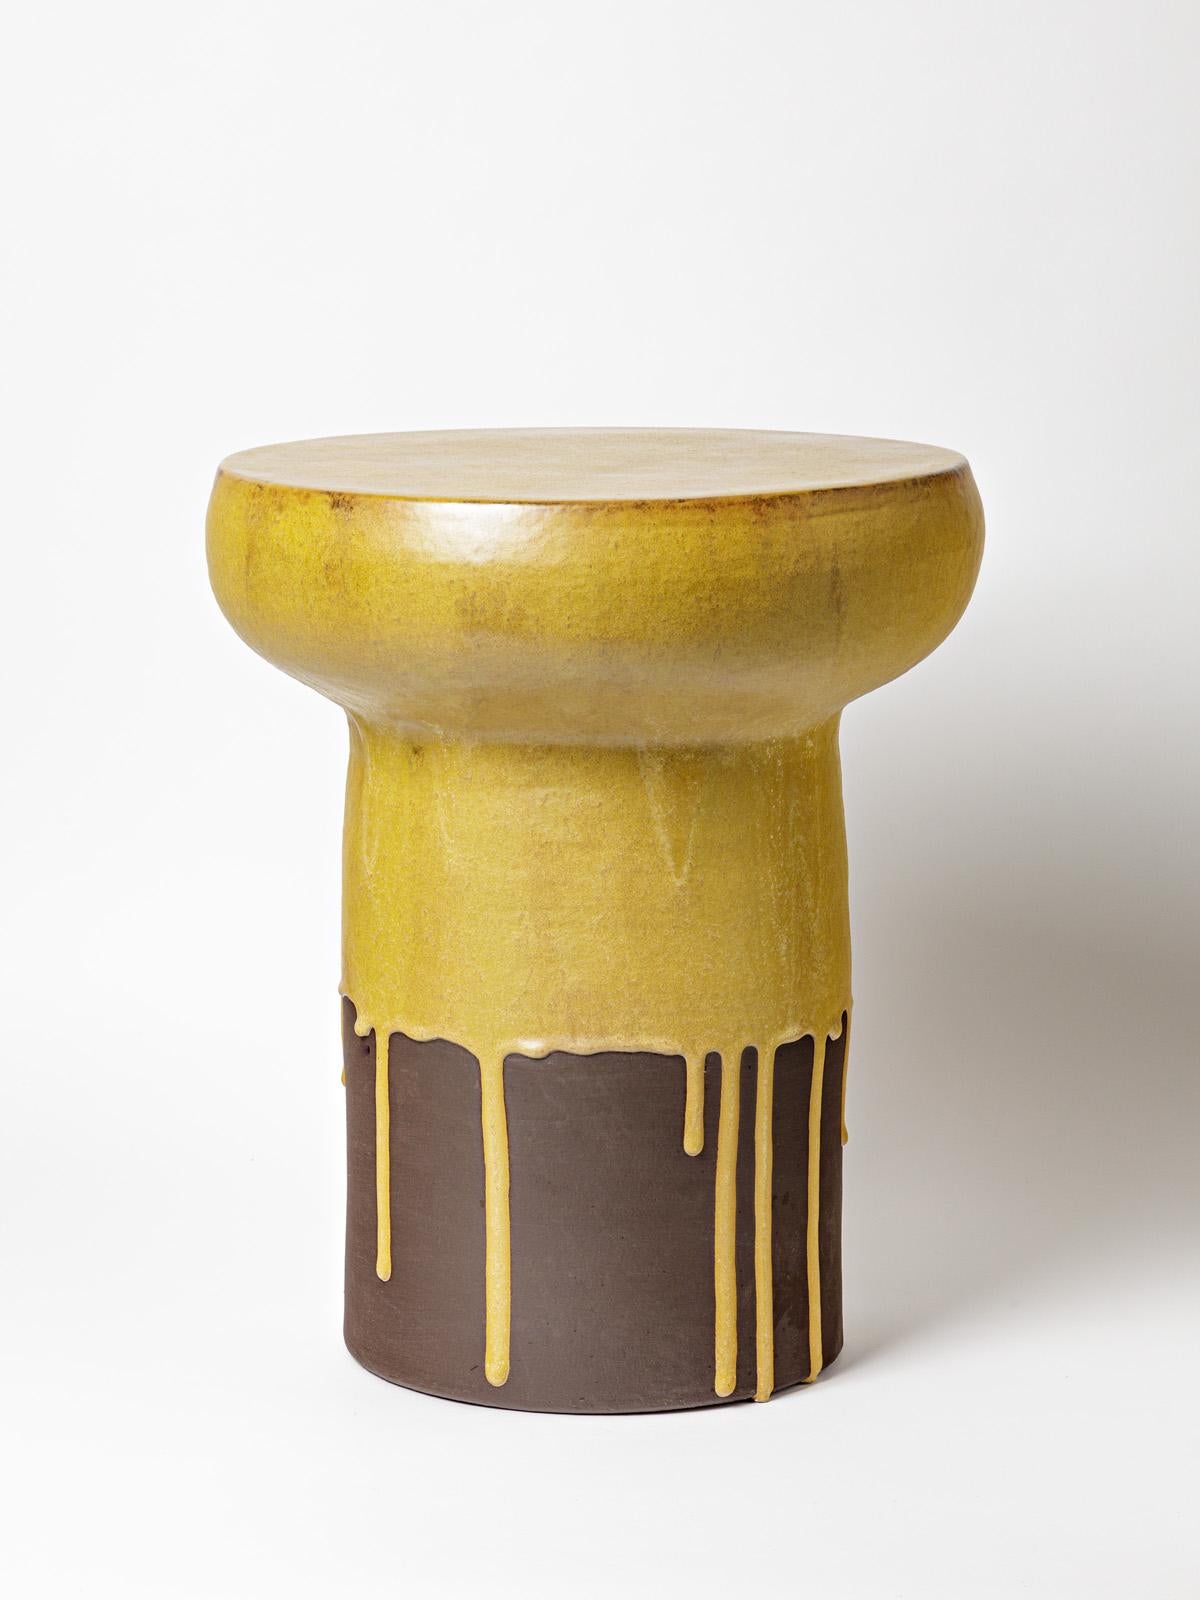 A ceramic stool or table with glazes decoration by Mia Jensen.
Unique piece.
Signed under the base.
Circa 2022.